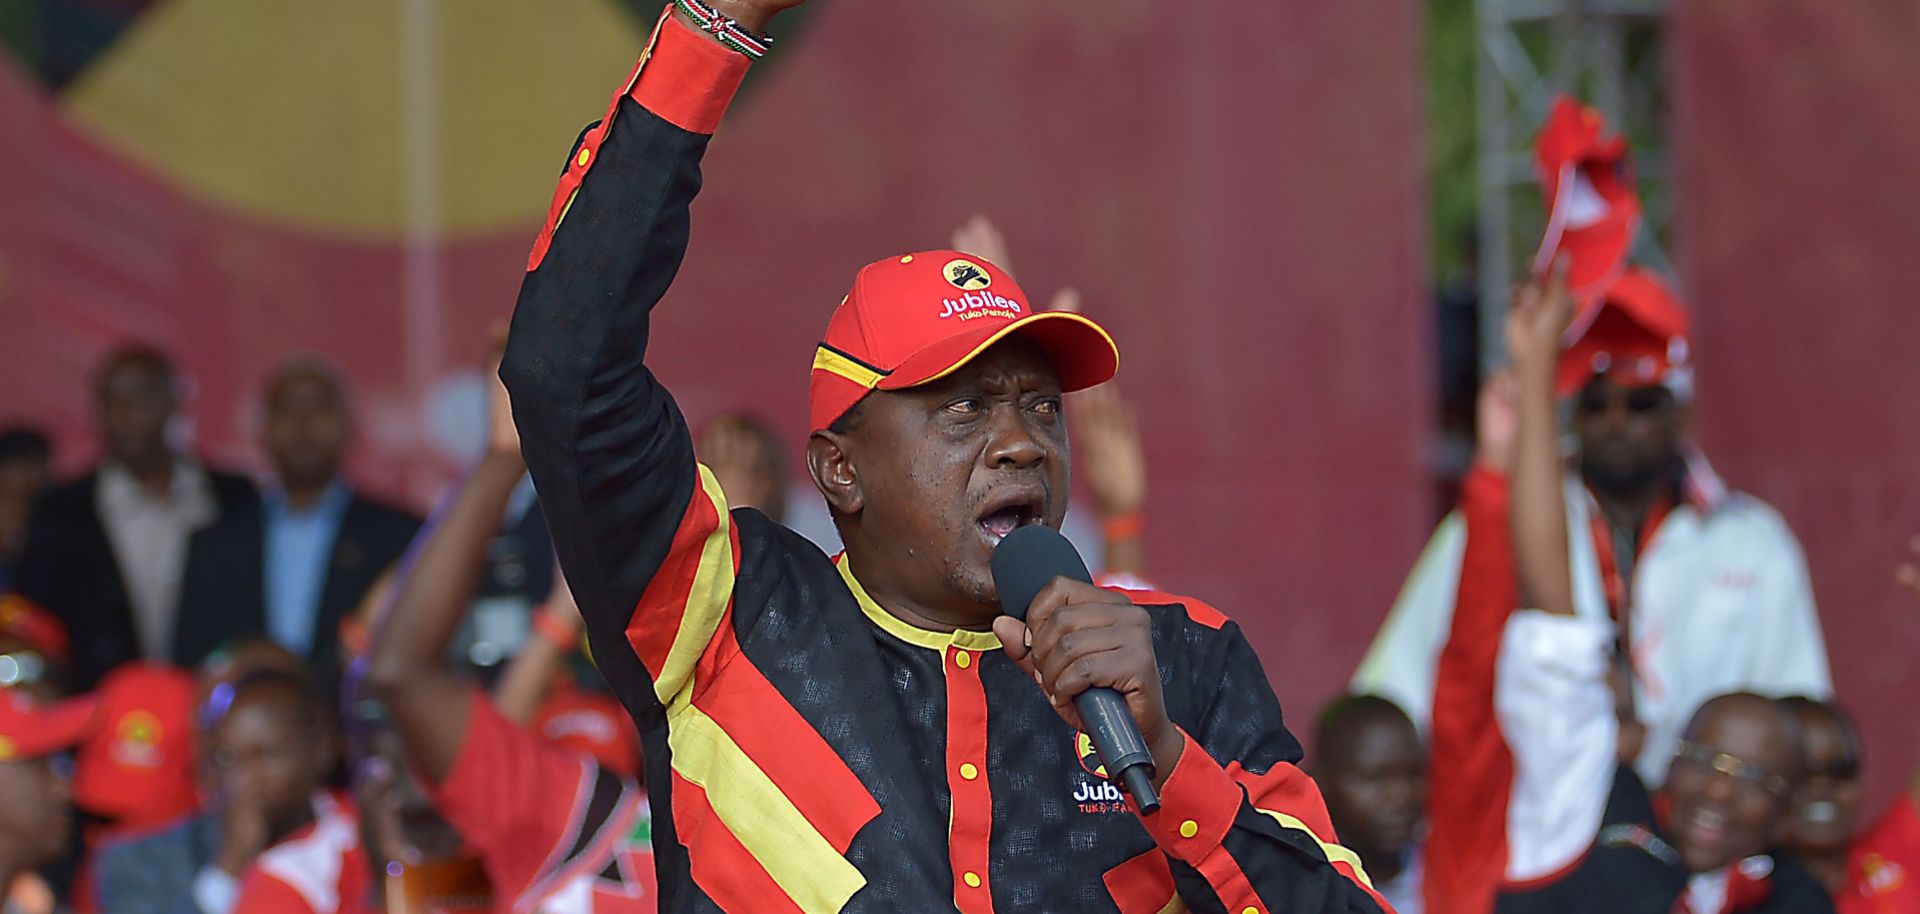 Kenyan President Uhuru Kenyatta addresses a crowd during a campaign rally for his Jubilee Party of Kenya in the capital of Nairobi. Kenya will hold its presidential election on Aug. 8.